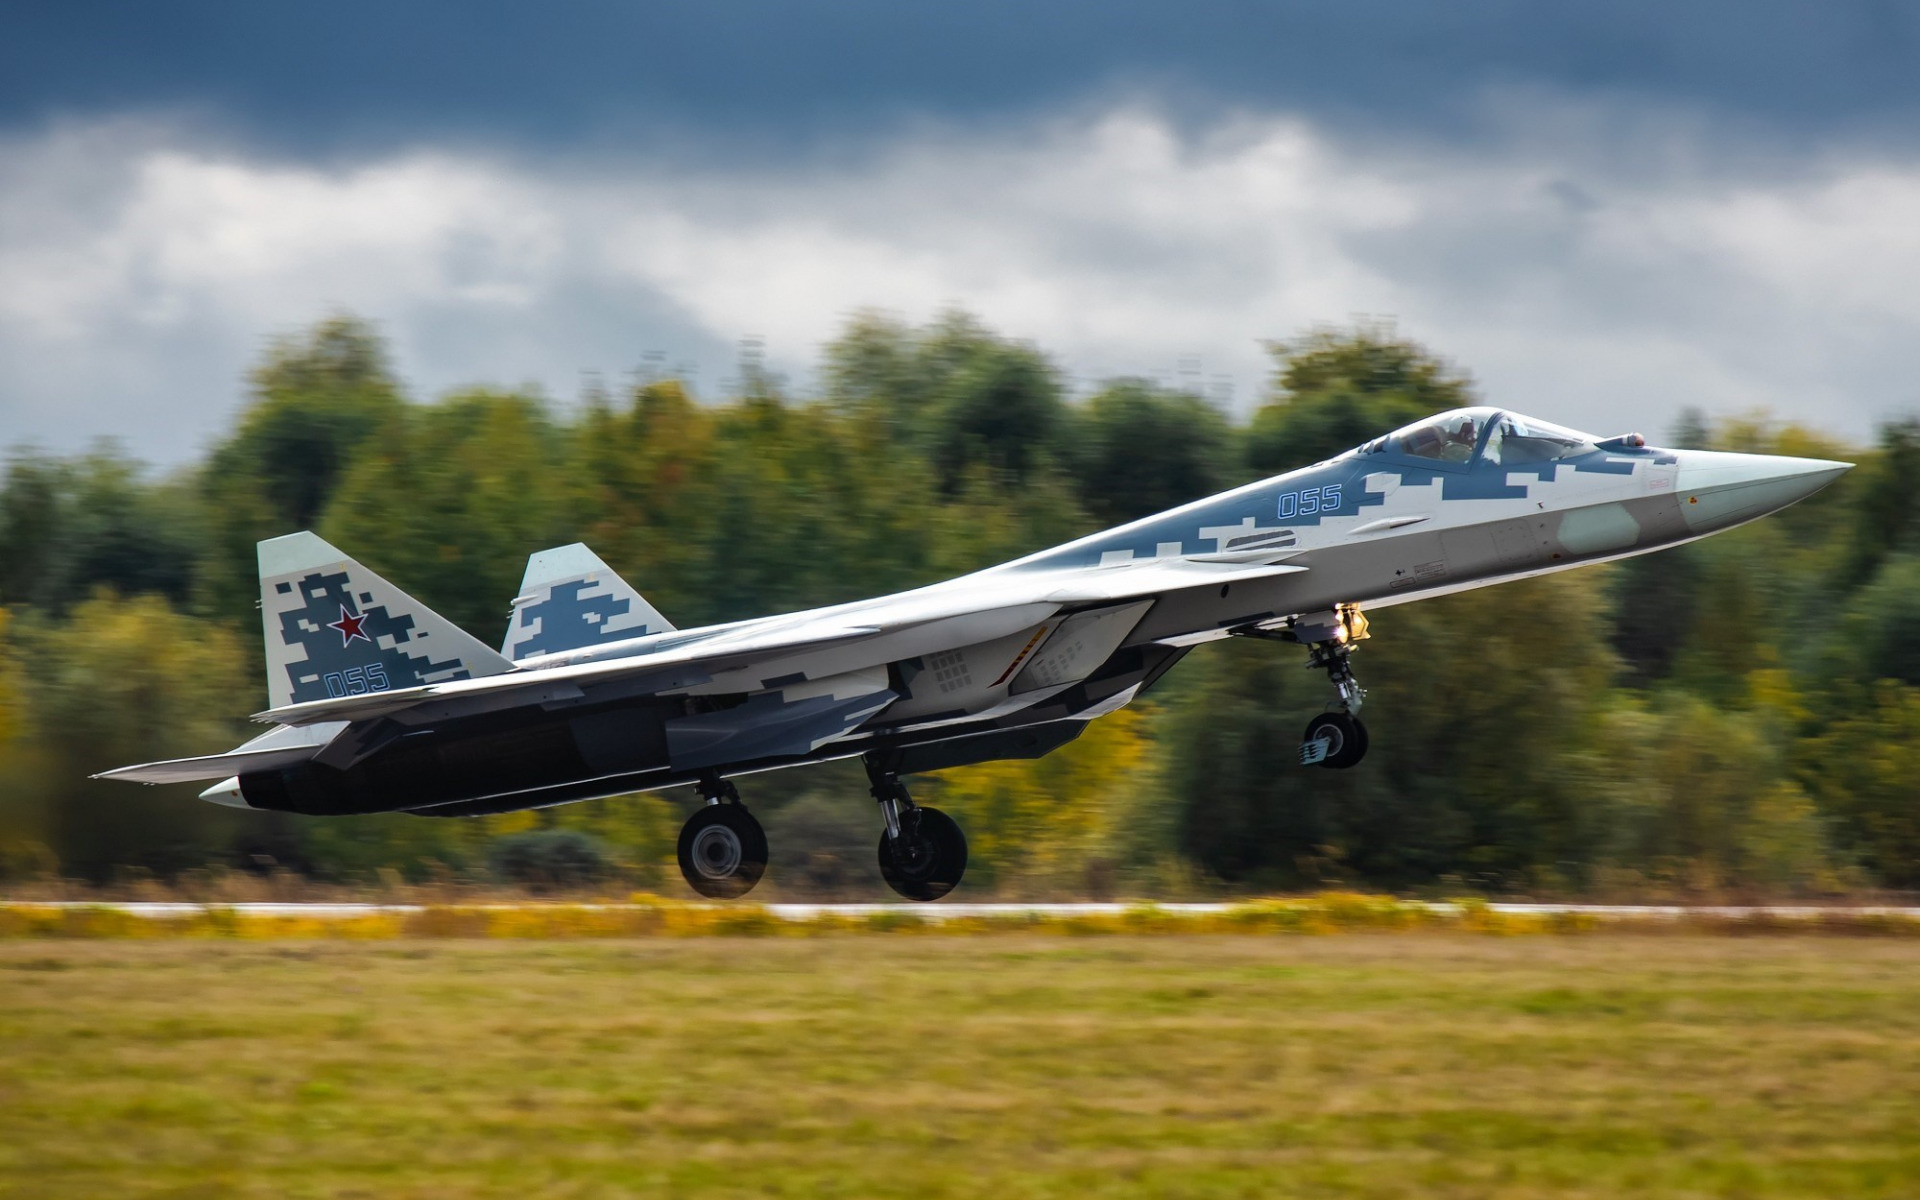 Russia's Sukhoi Su-57 stealth multirole fighter aircraft